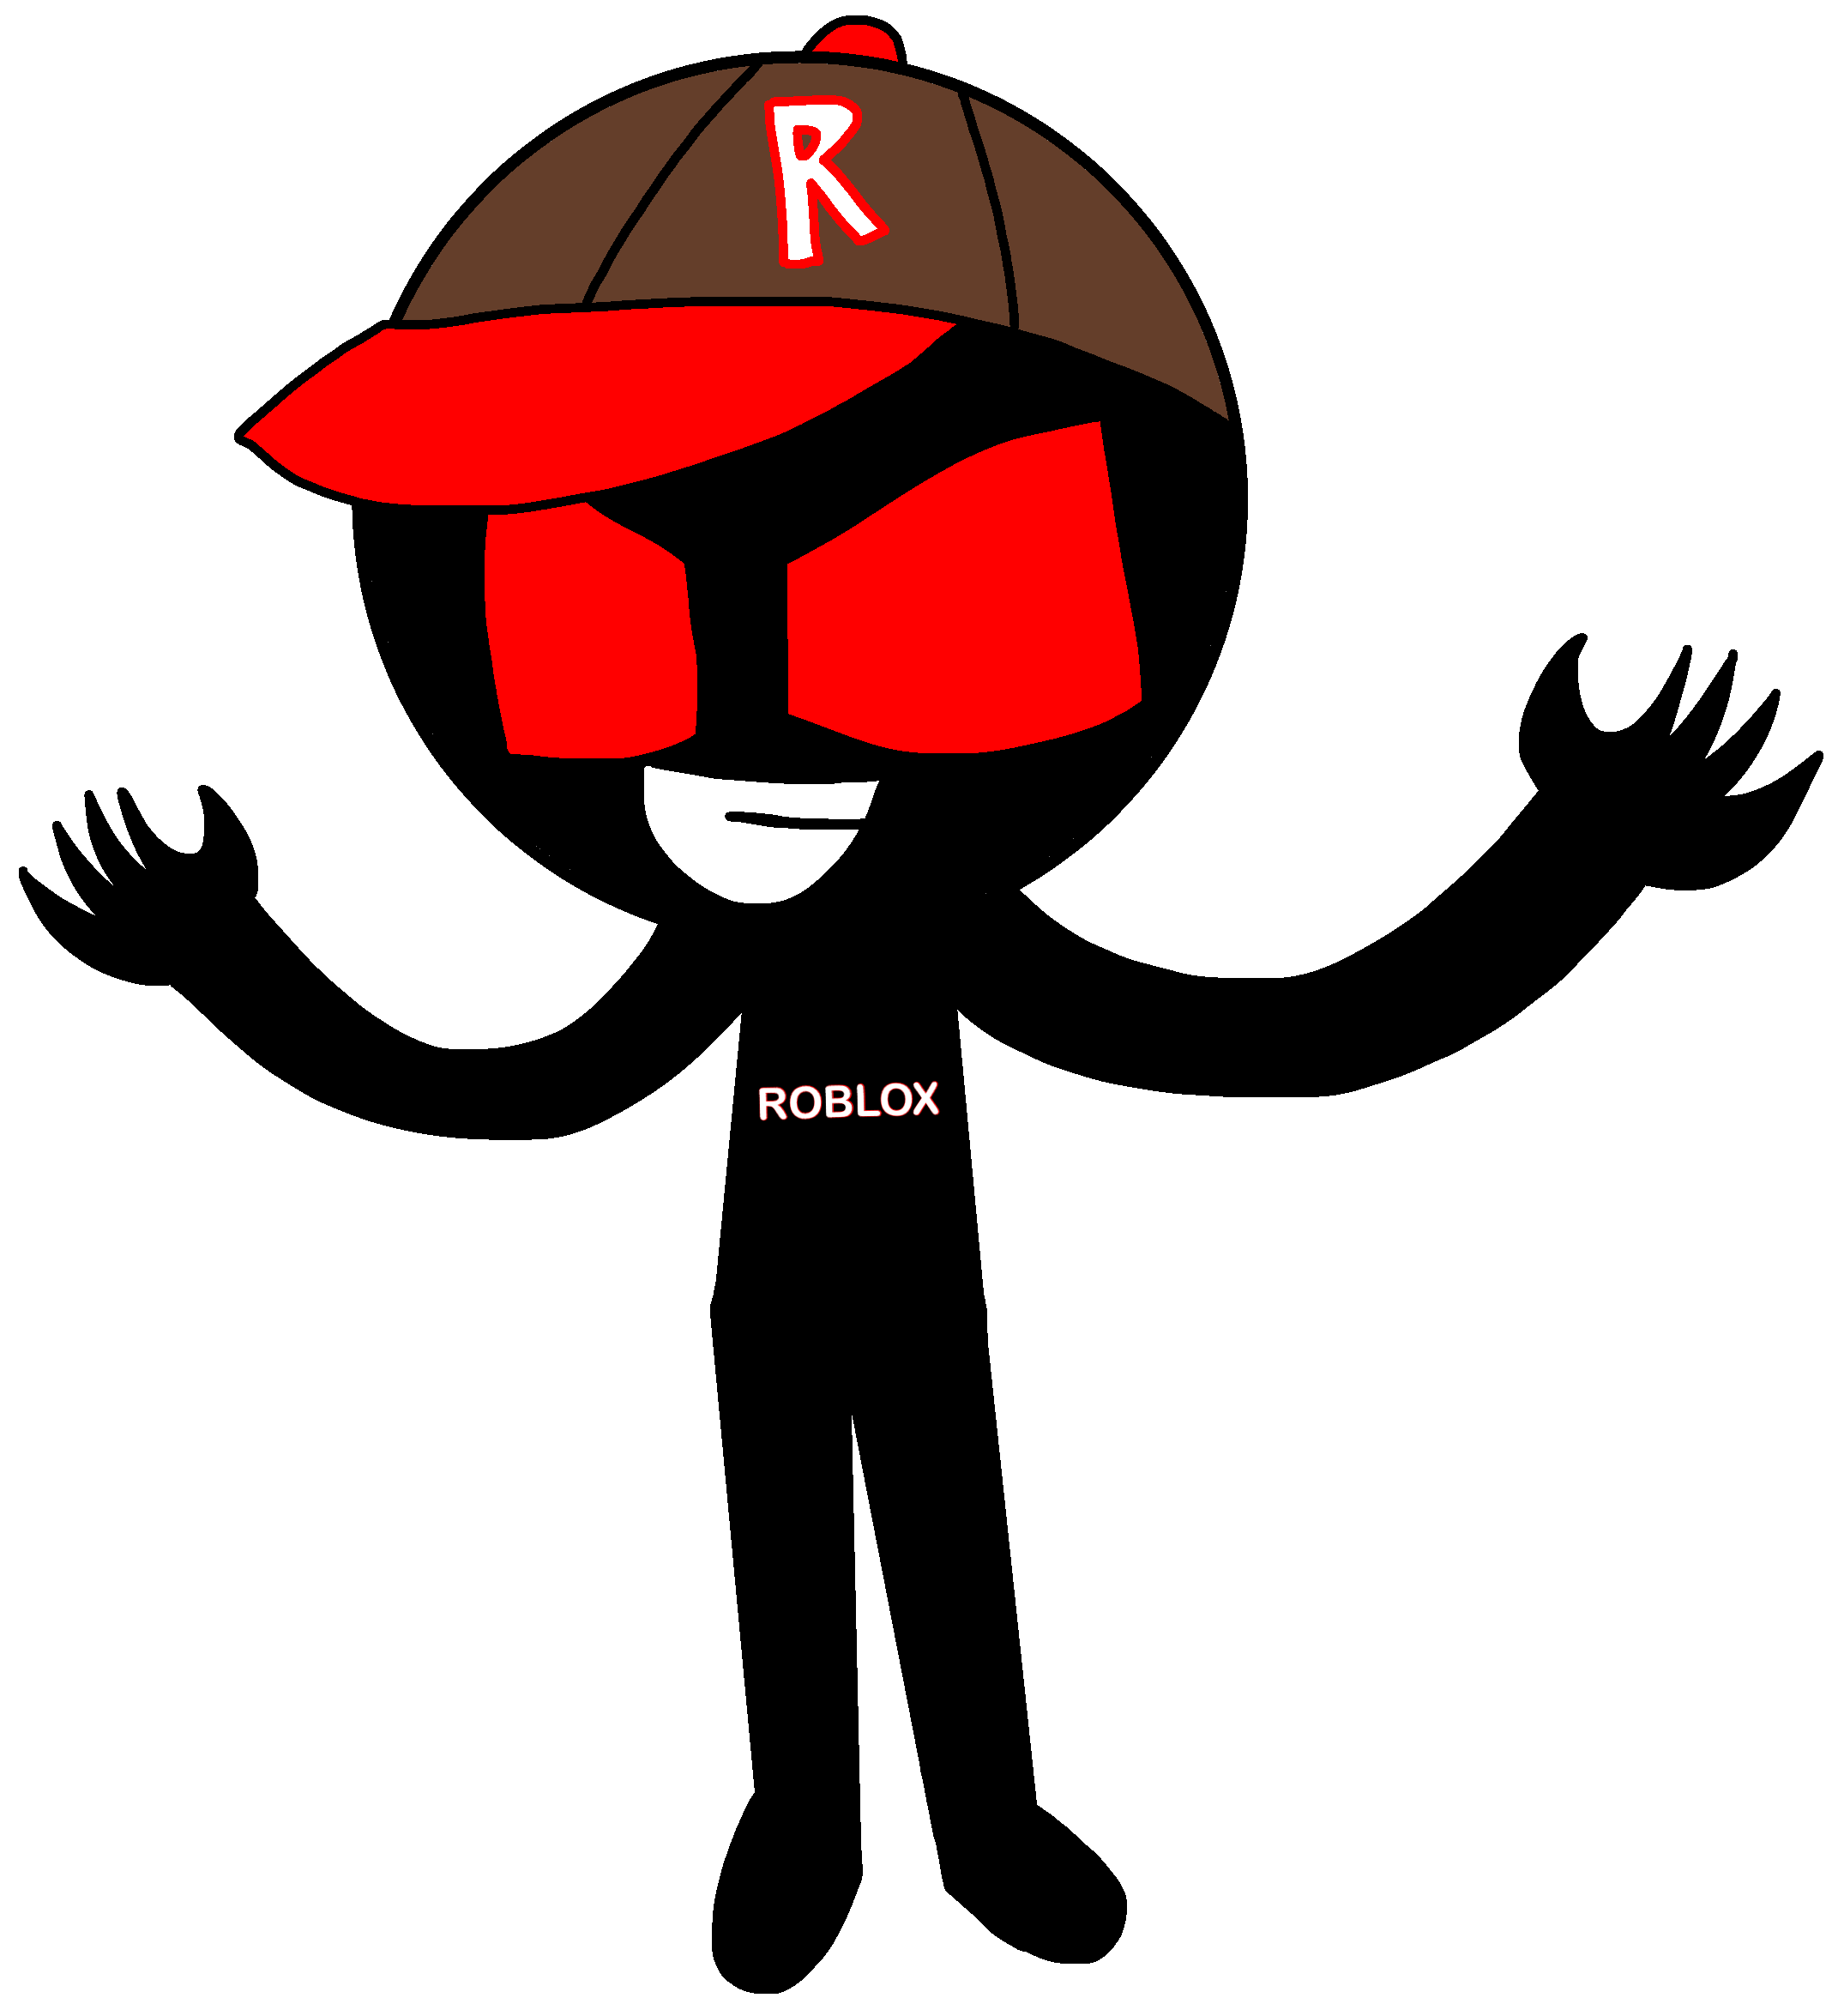 ROBLOX 666 Disconnection by Eleqtra on DeviantArt